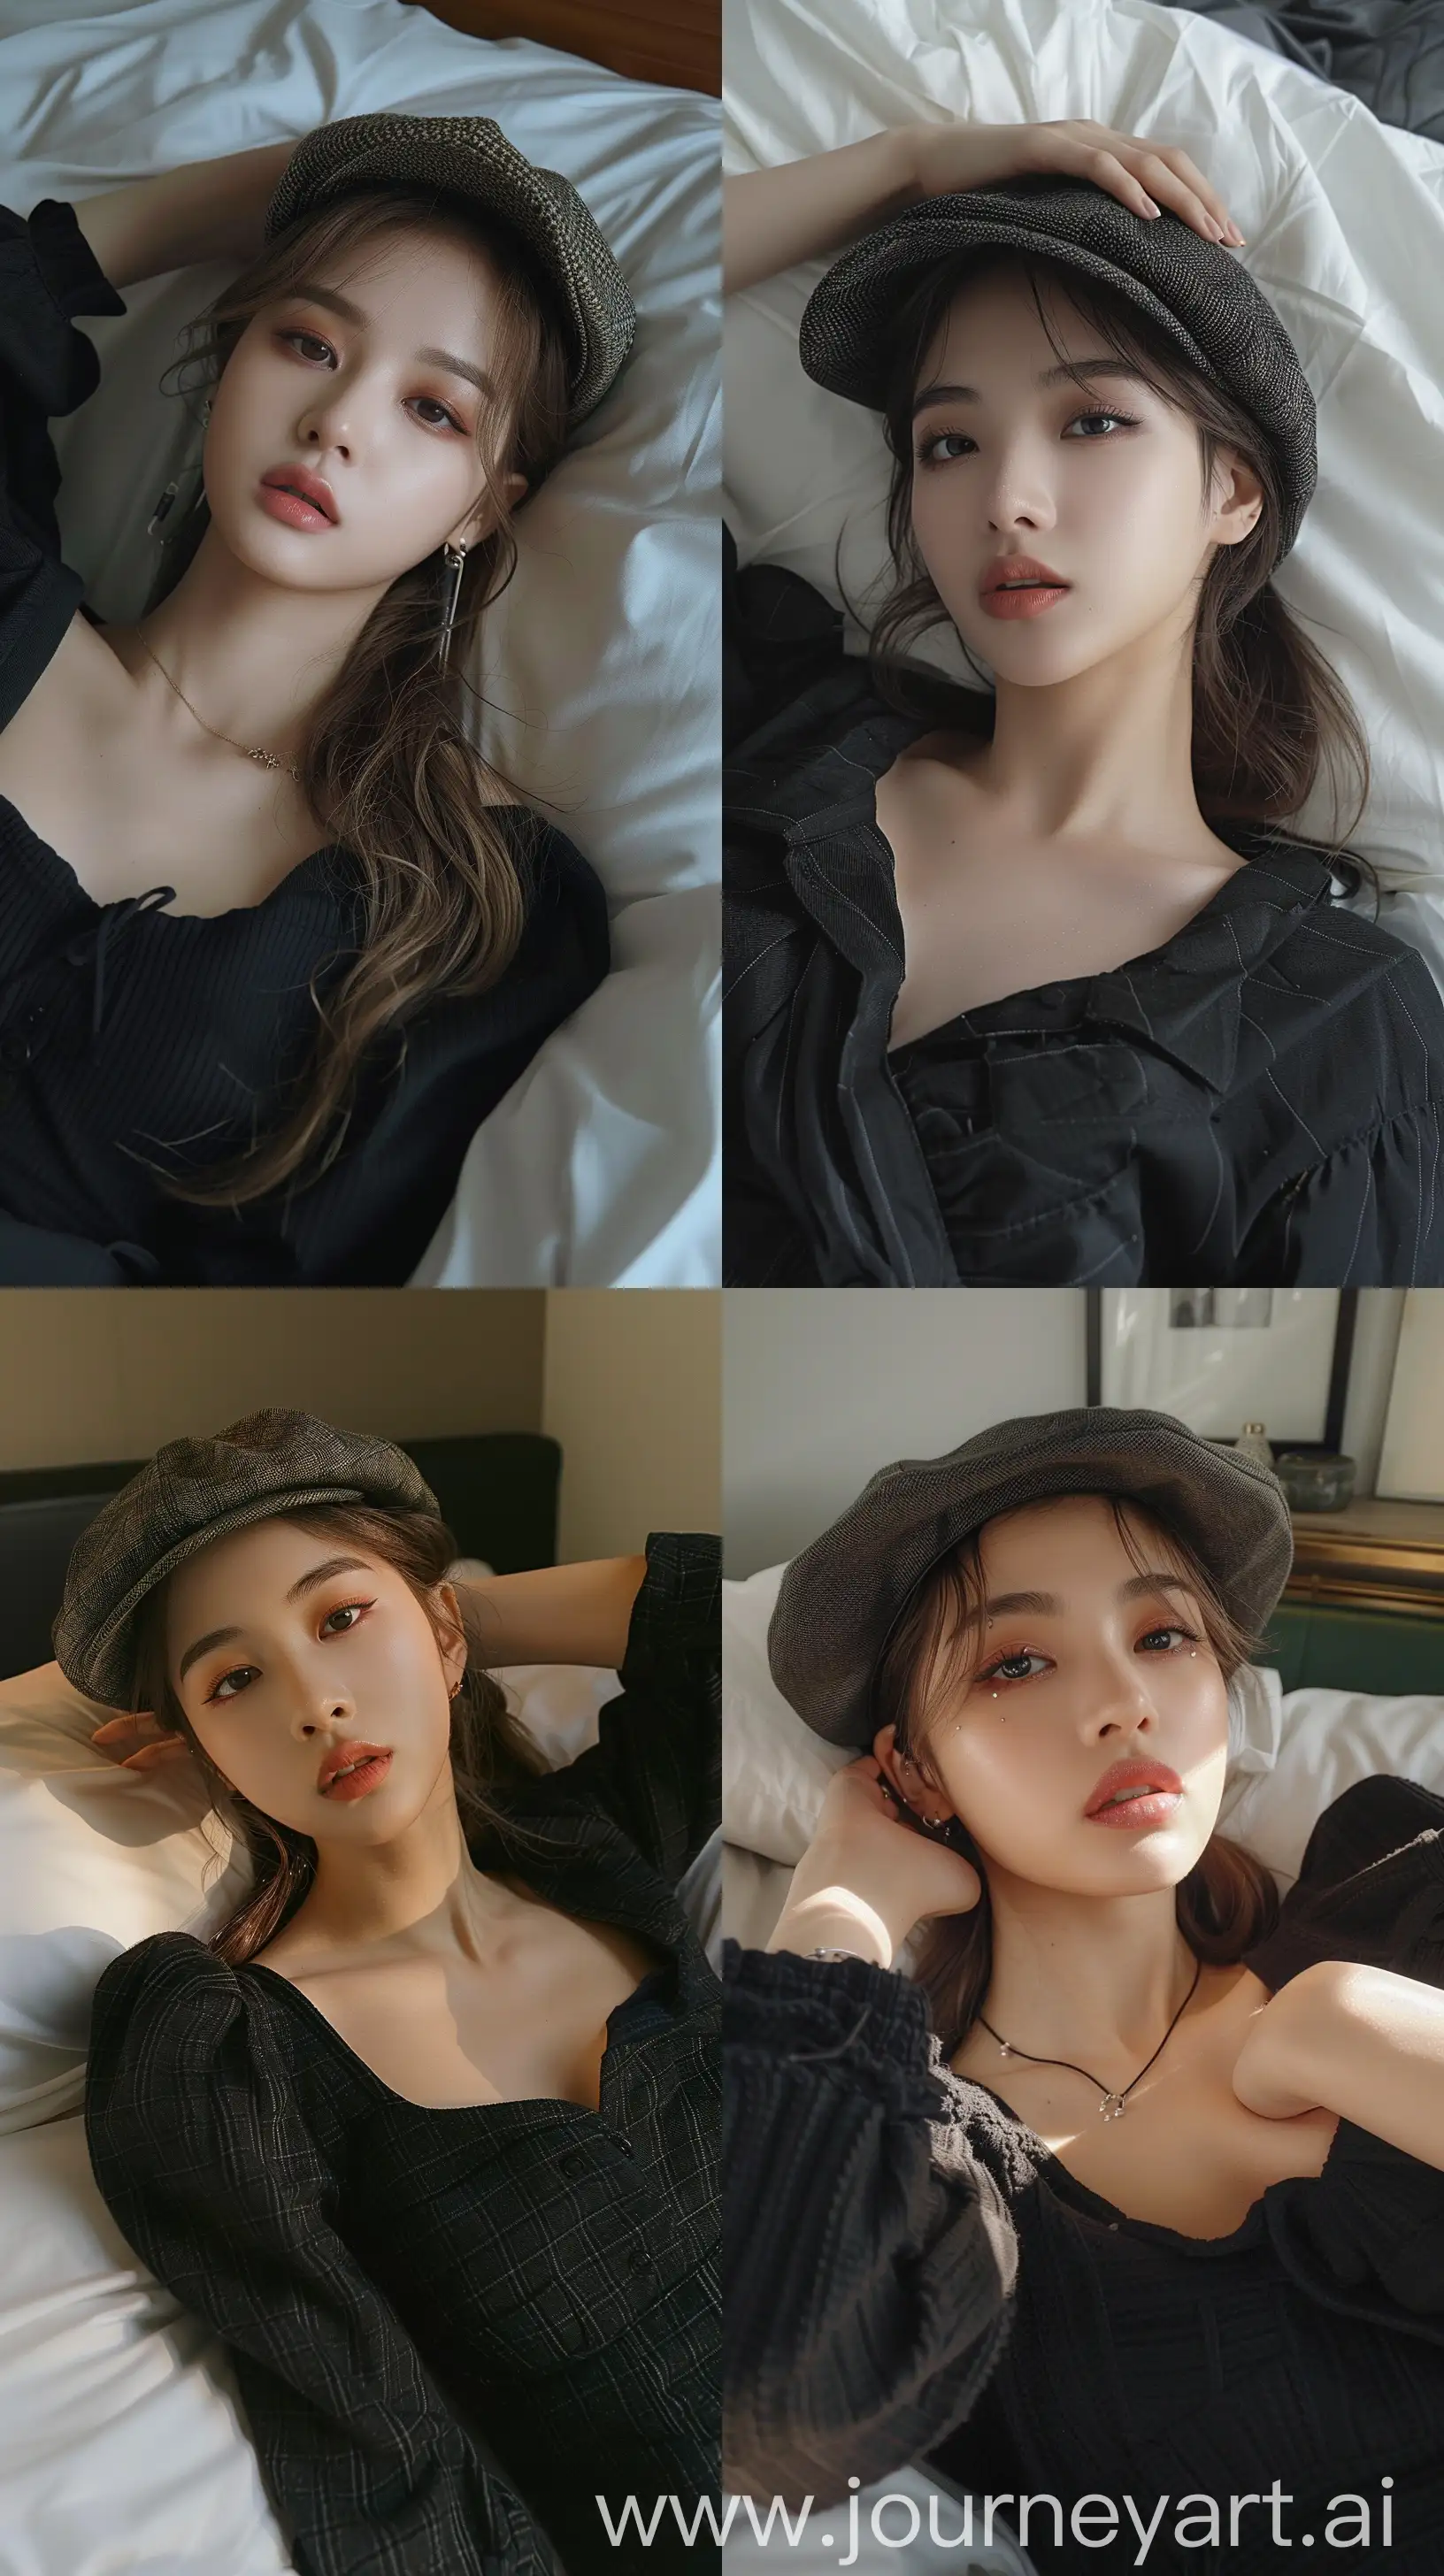 Blackpink-Jennie-Selfie-in-Aesthetic-Makeup-and-Black-Attire-on-Bed